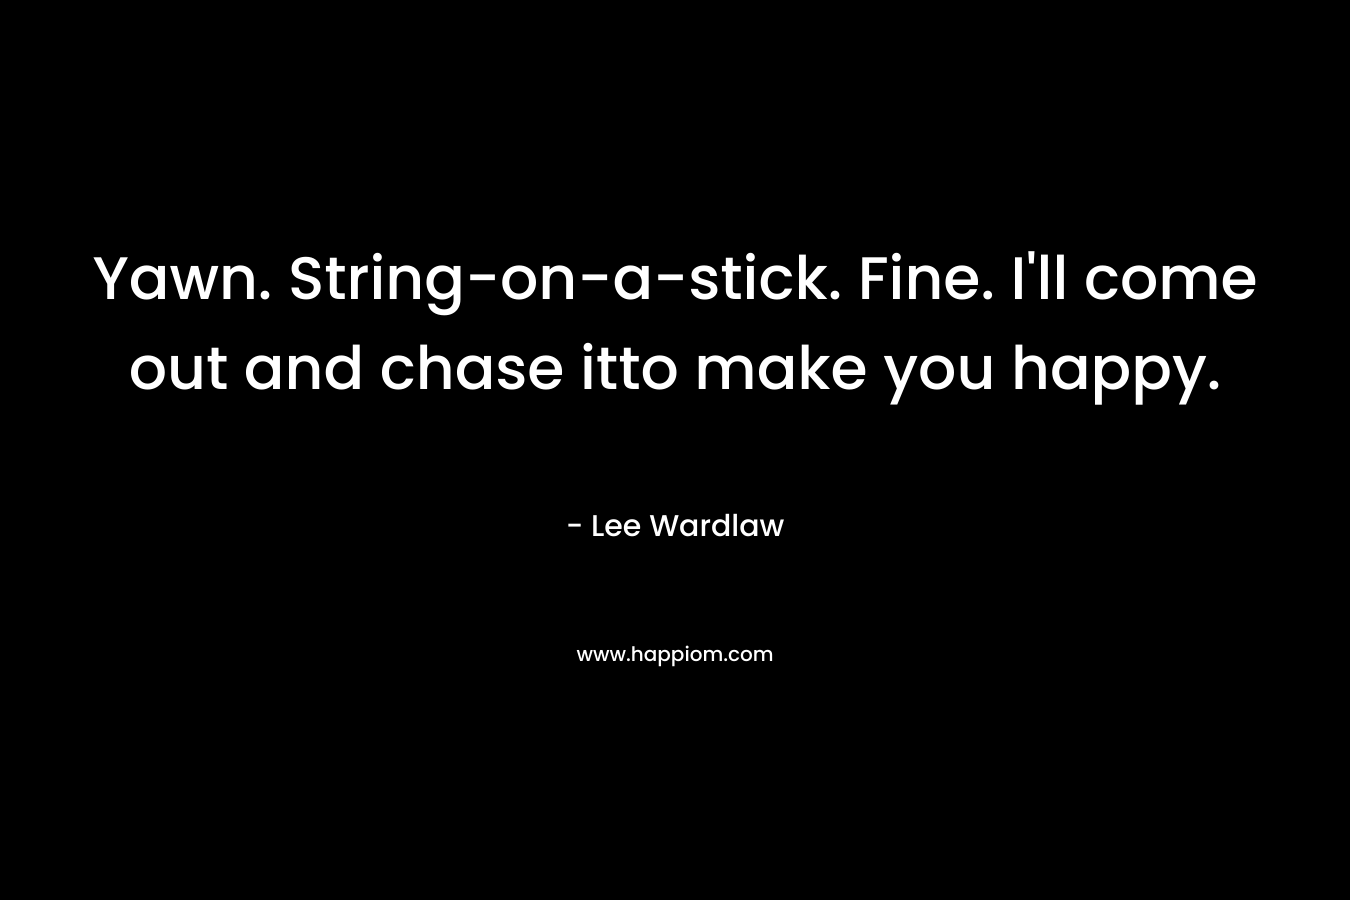 Yawn. String-on-a-stick. Fine. I’ll come out and chase itto make you happy. – Lee Wardlaw